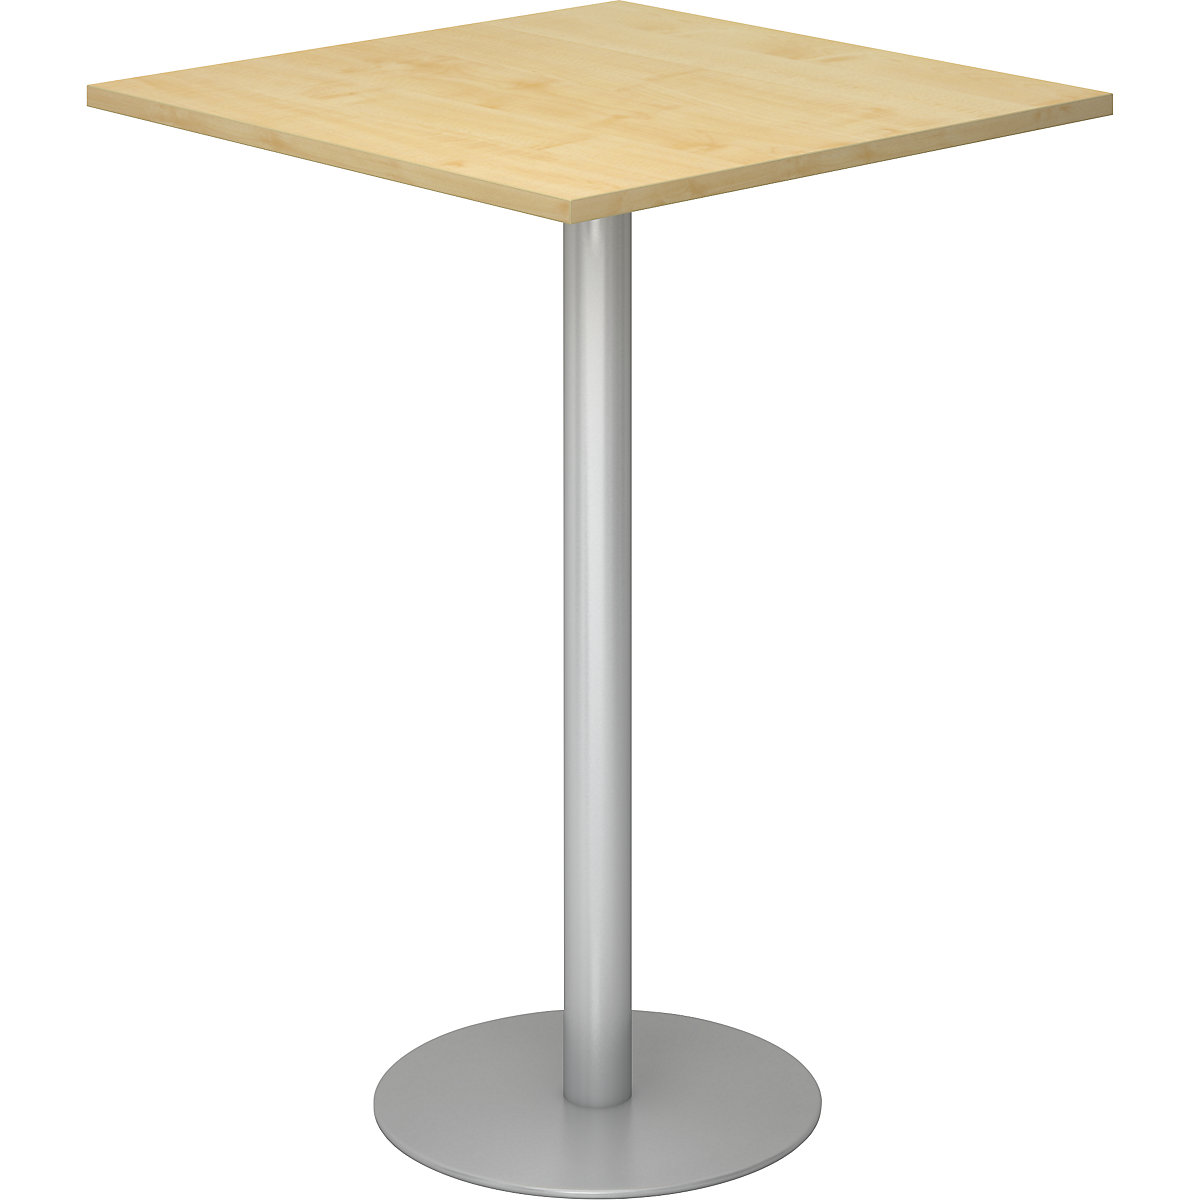 Pedestal table, LxW 800 x 800 mm, 1116 mm high, silver frame, tabletop in maple finish-7